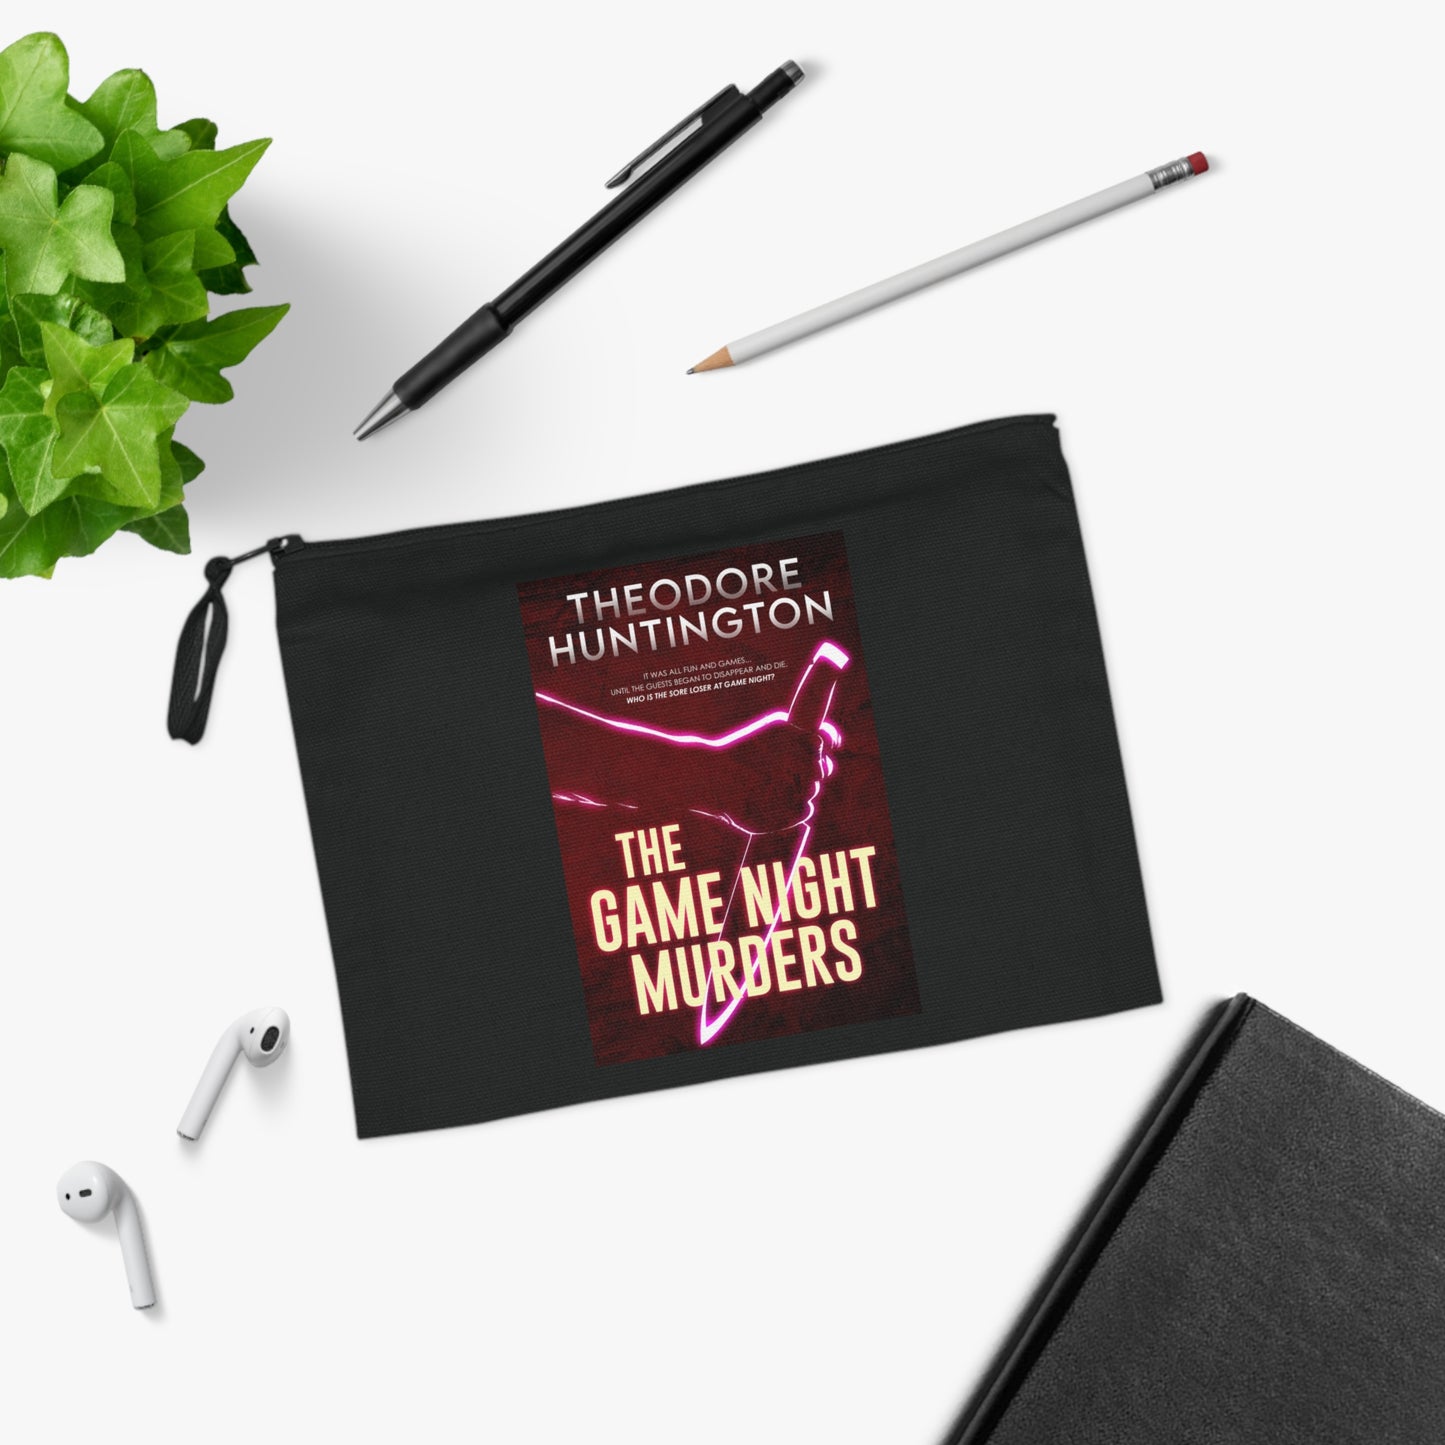 The Game Night Murders - Pencil Case